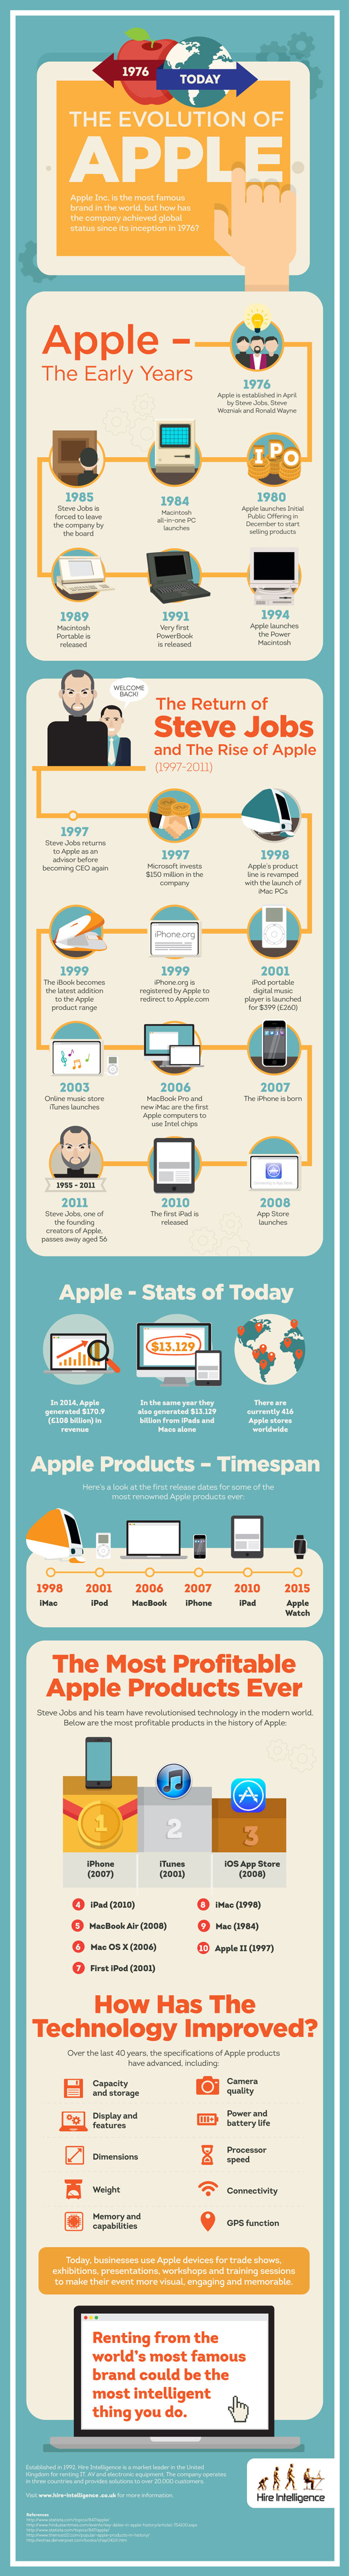 The Evolution Of Apple [infographic]